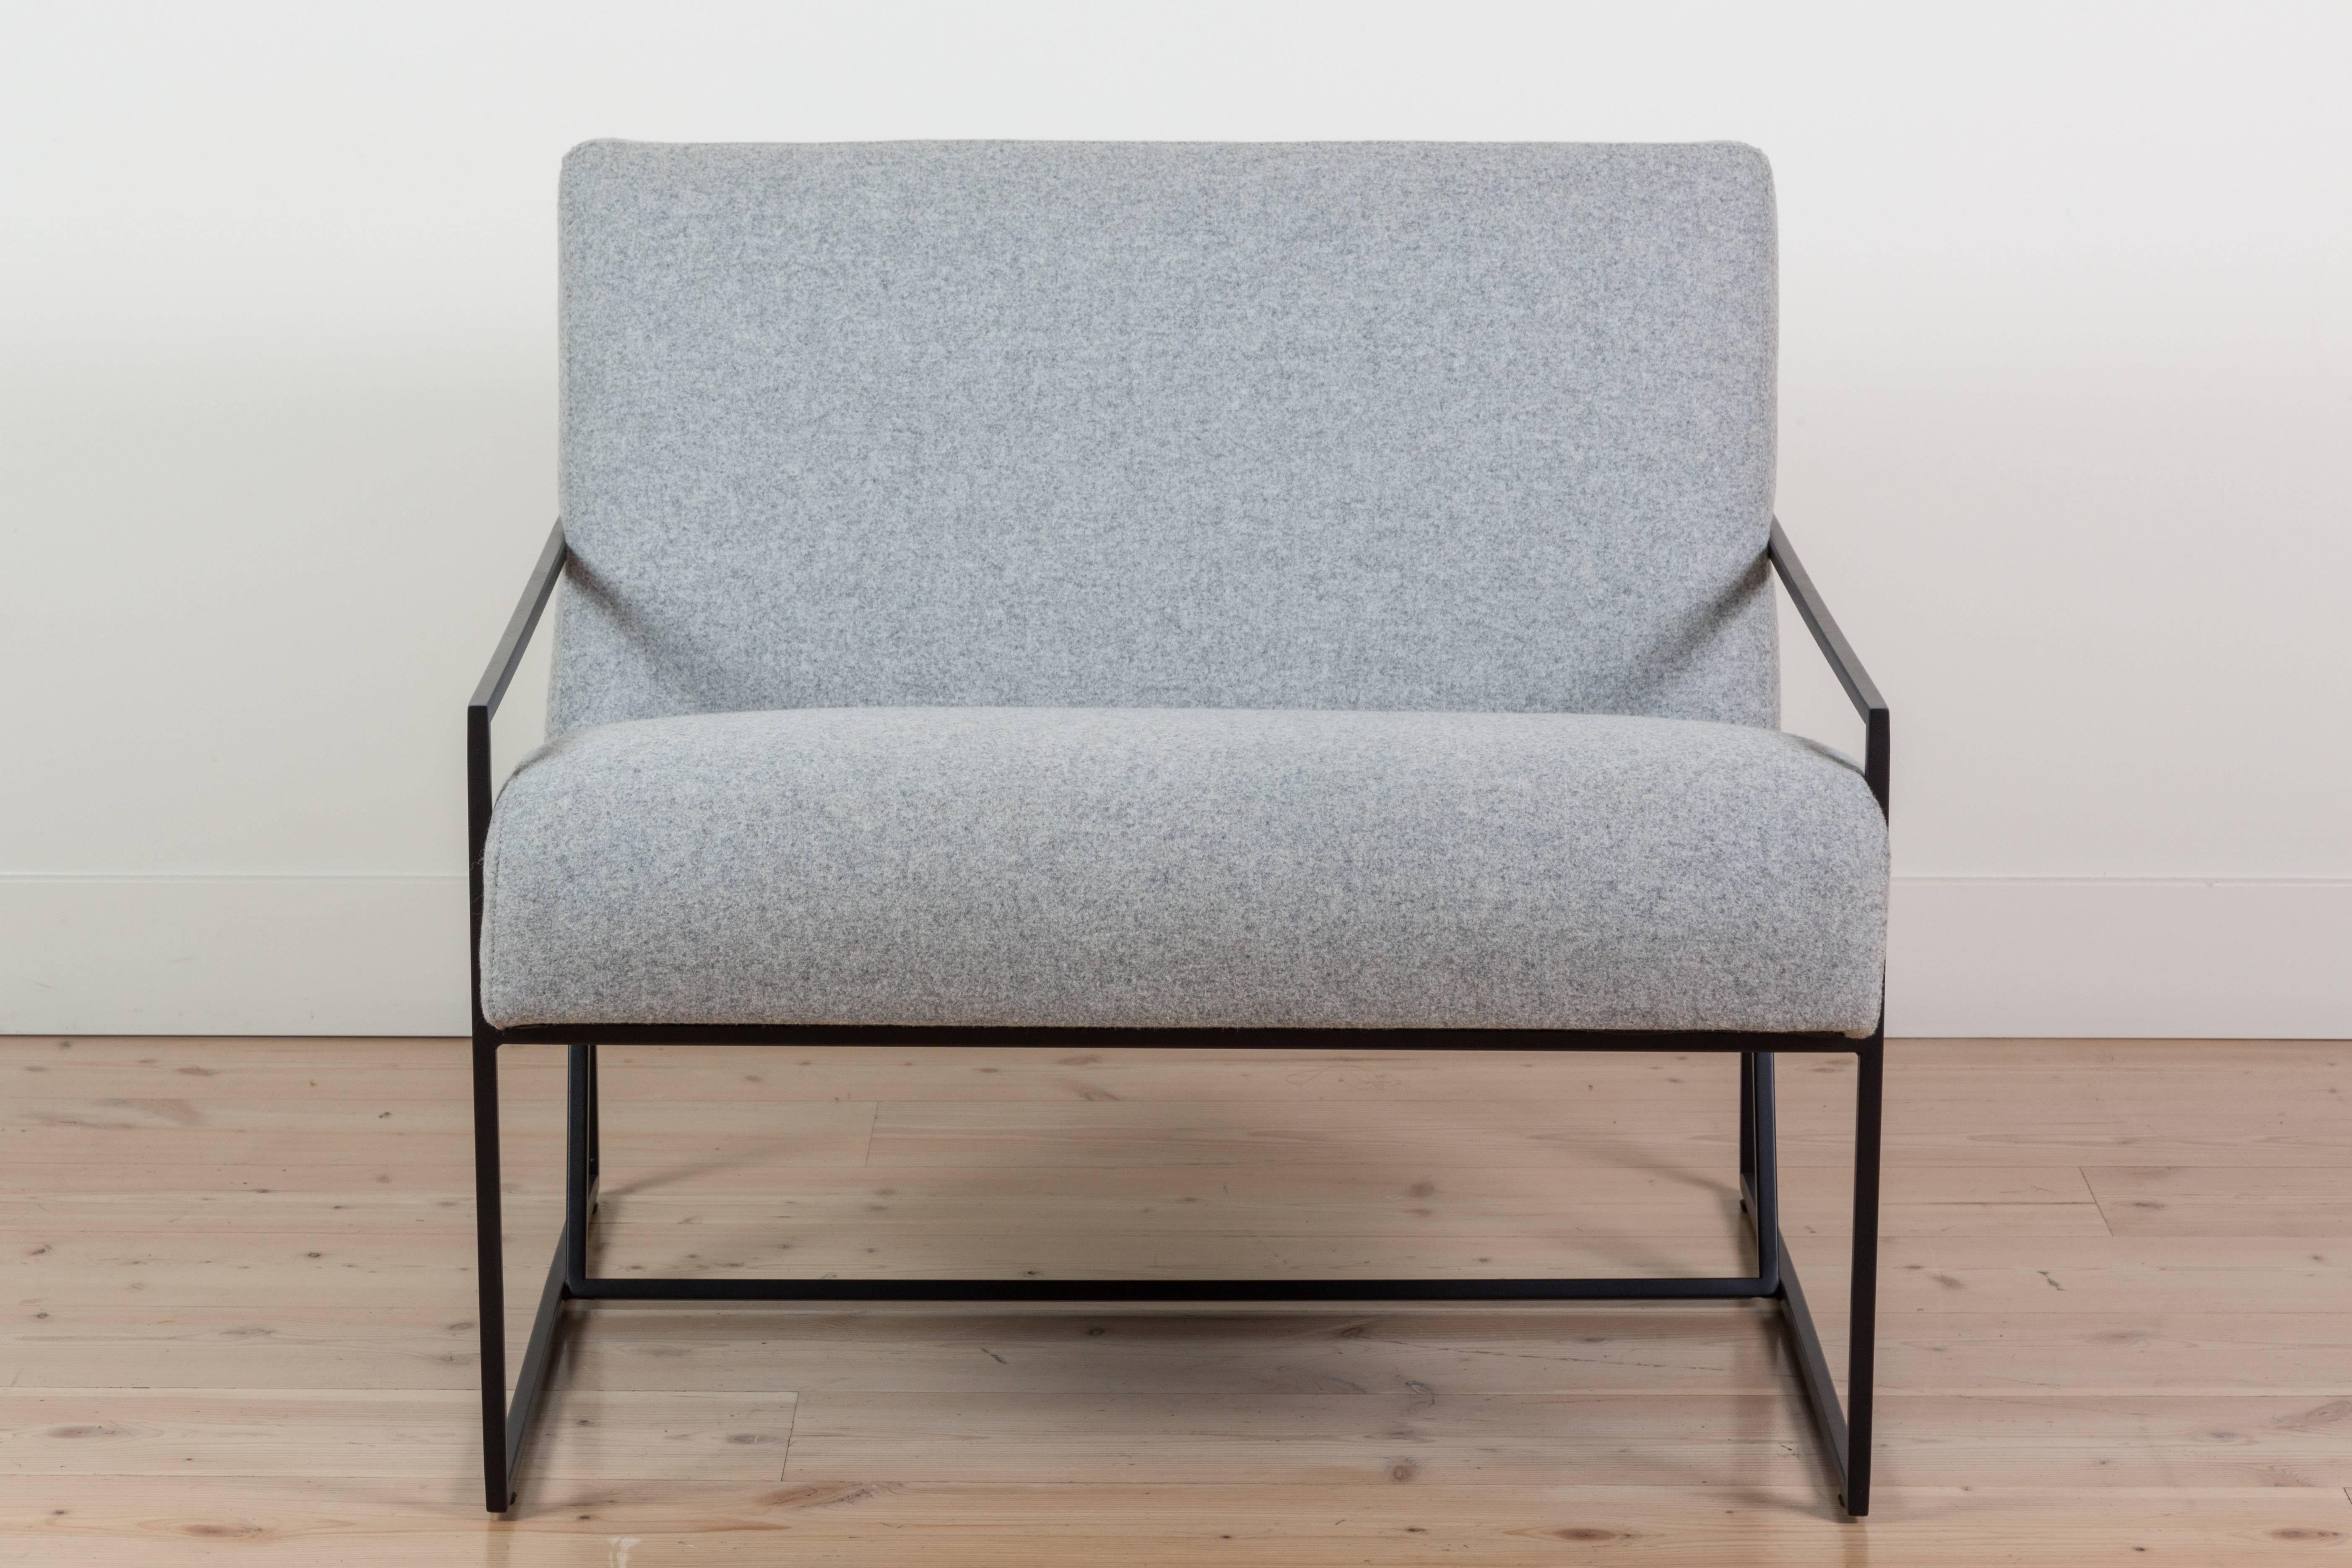 The Thin frame lounge chair is a modern lounge chair with a low-profile, thin metal frame that is available in an array of finishes and the option of diamond tufting. Shown here in matte black powdercoat. 

The Lawson-Fenning Collection is designed